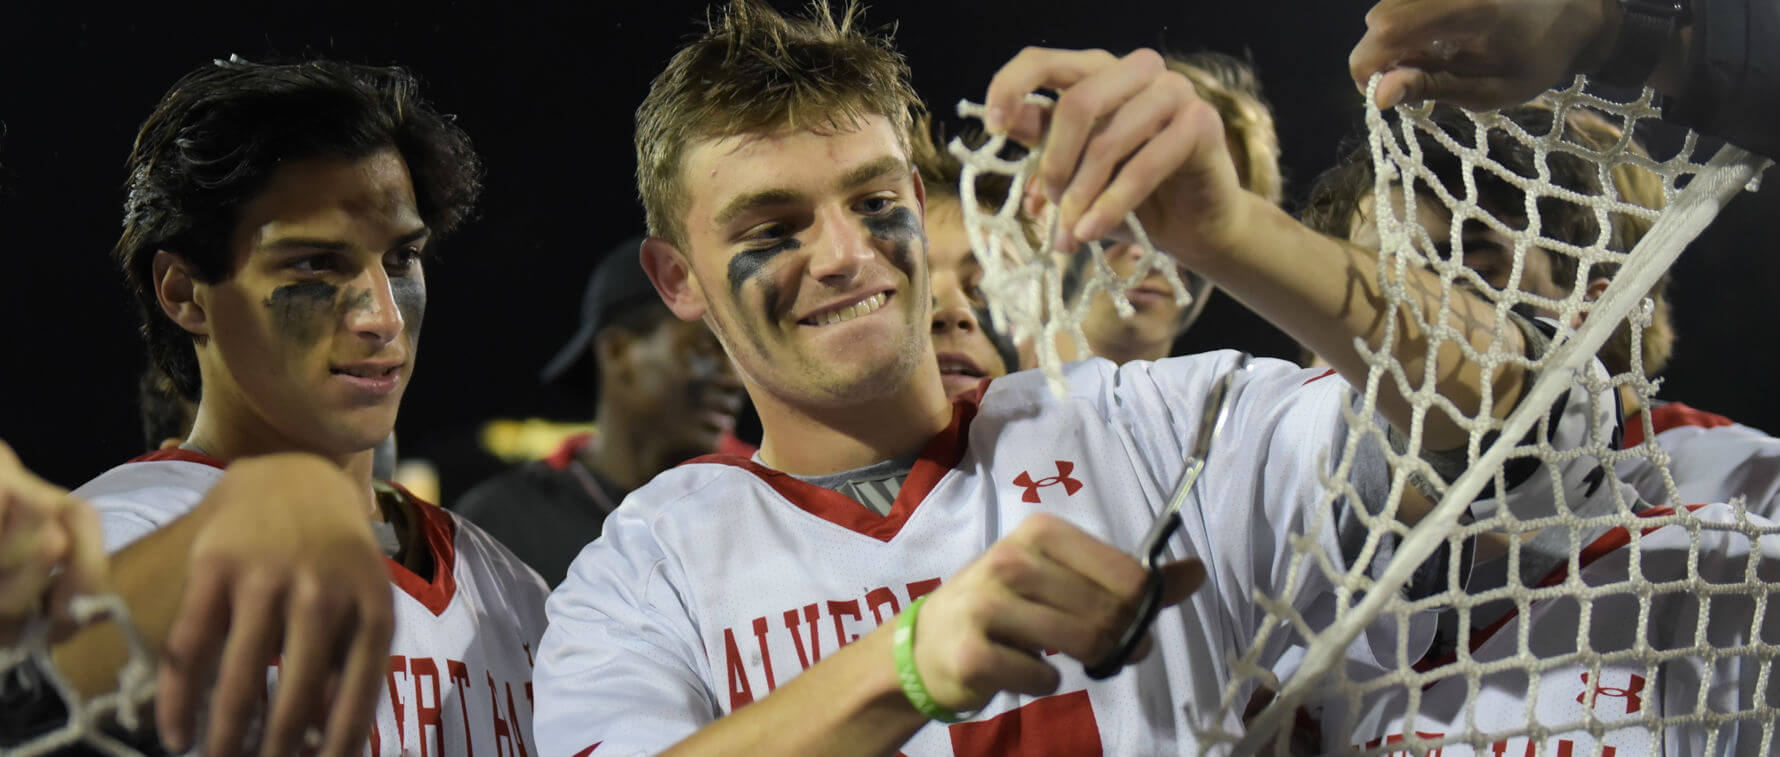 After emotional family losses, Calvert Hall wins A Conference lacrosse title